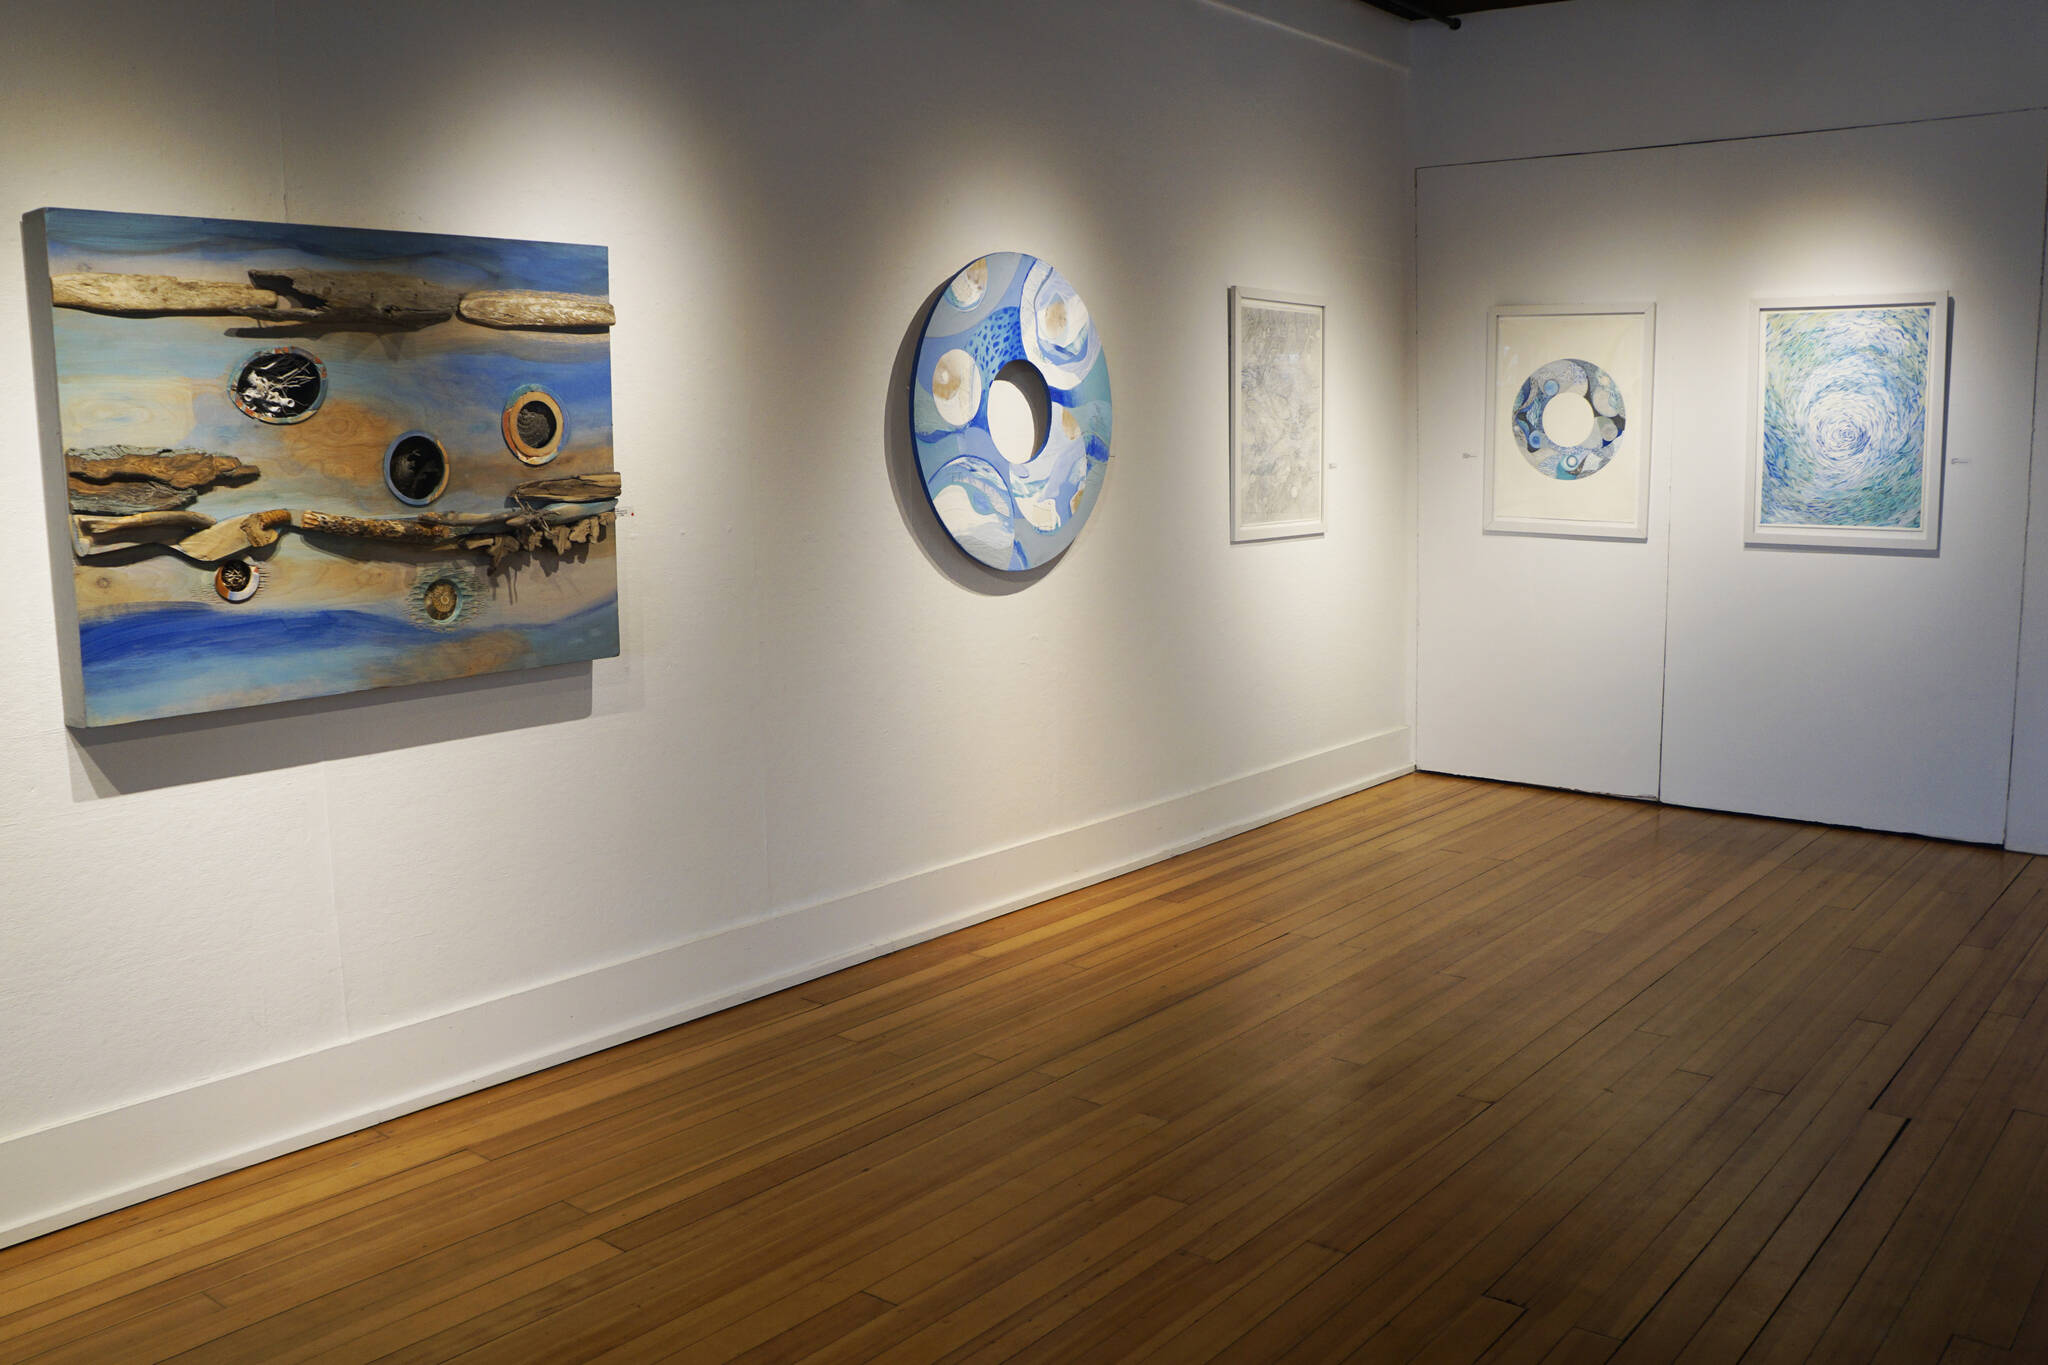 A corner of Don Decker’s exhibit, Thin Ice, showing through February at Bunnell Street Arts Center in Homer, Alaska. (Photo by Michael Armstrong/Homer News)